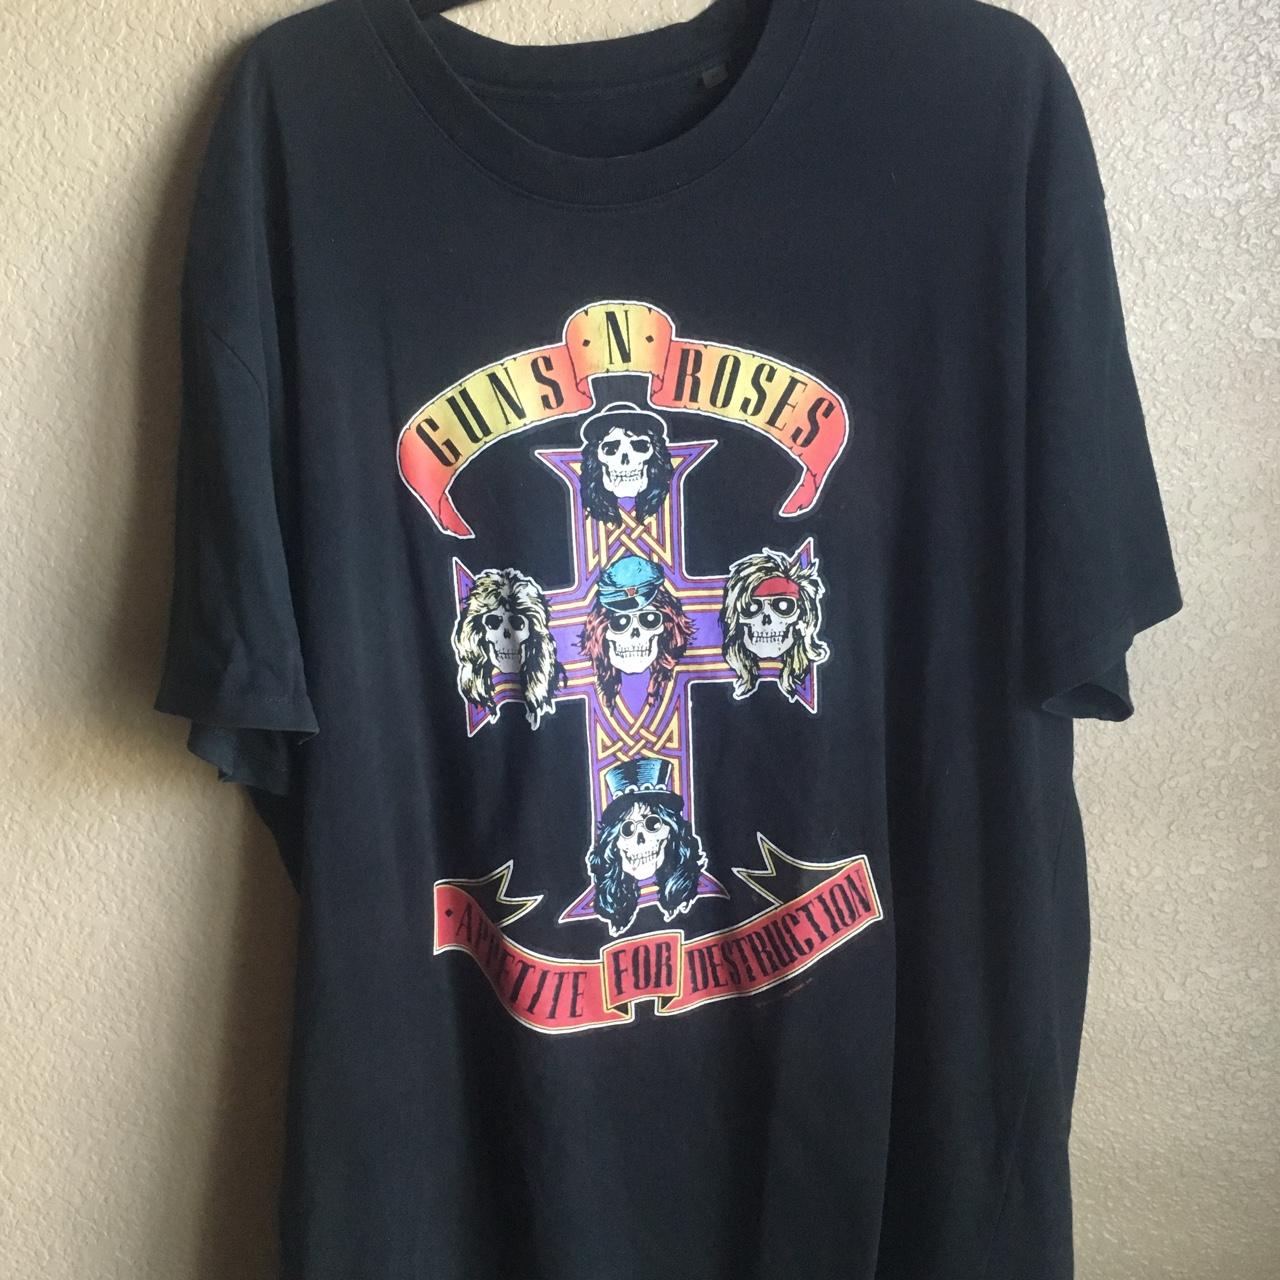 authentic Fear of God Guns N’ Roses T. One of my